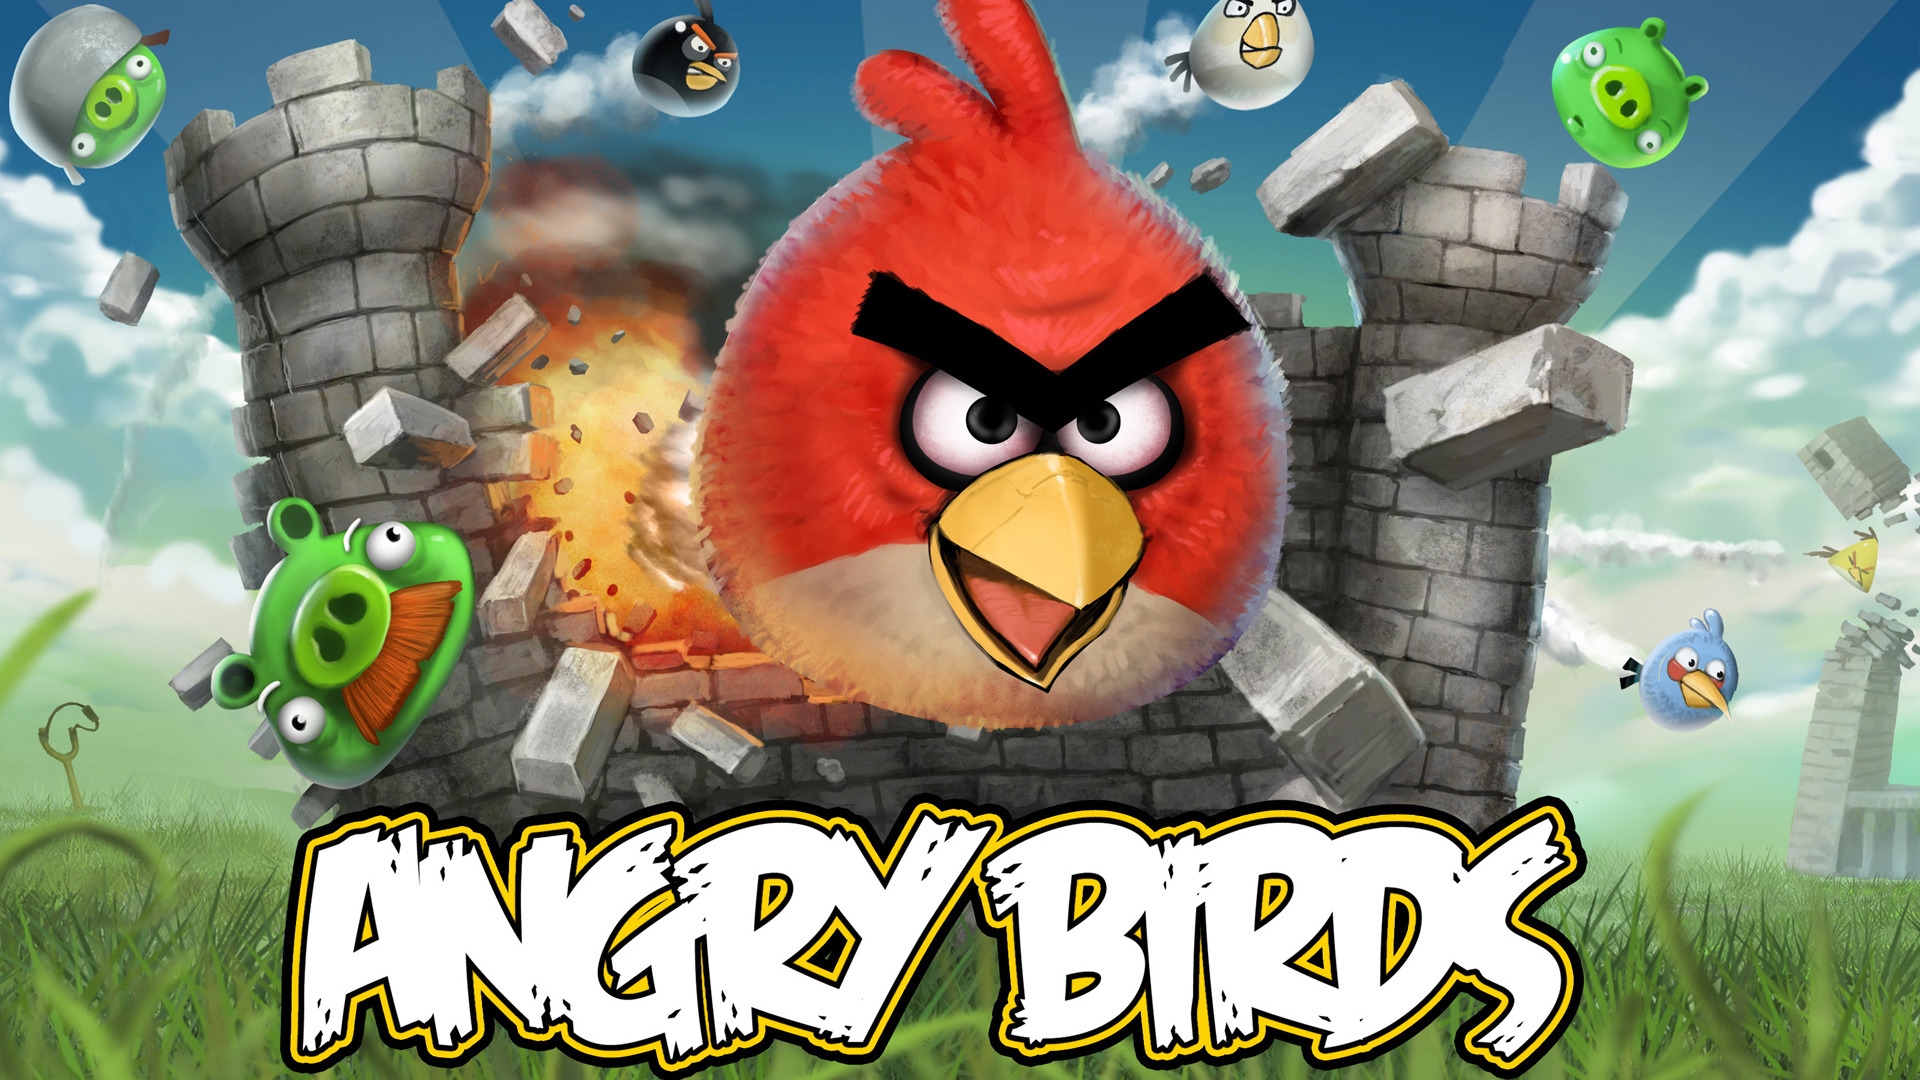 Angry Birds for 1920 x 1080 HDTV 1080p resolution